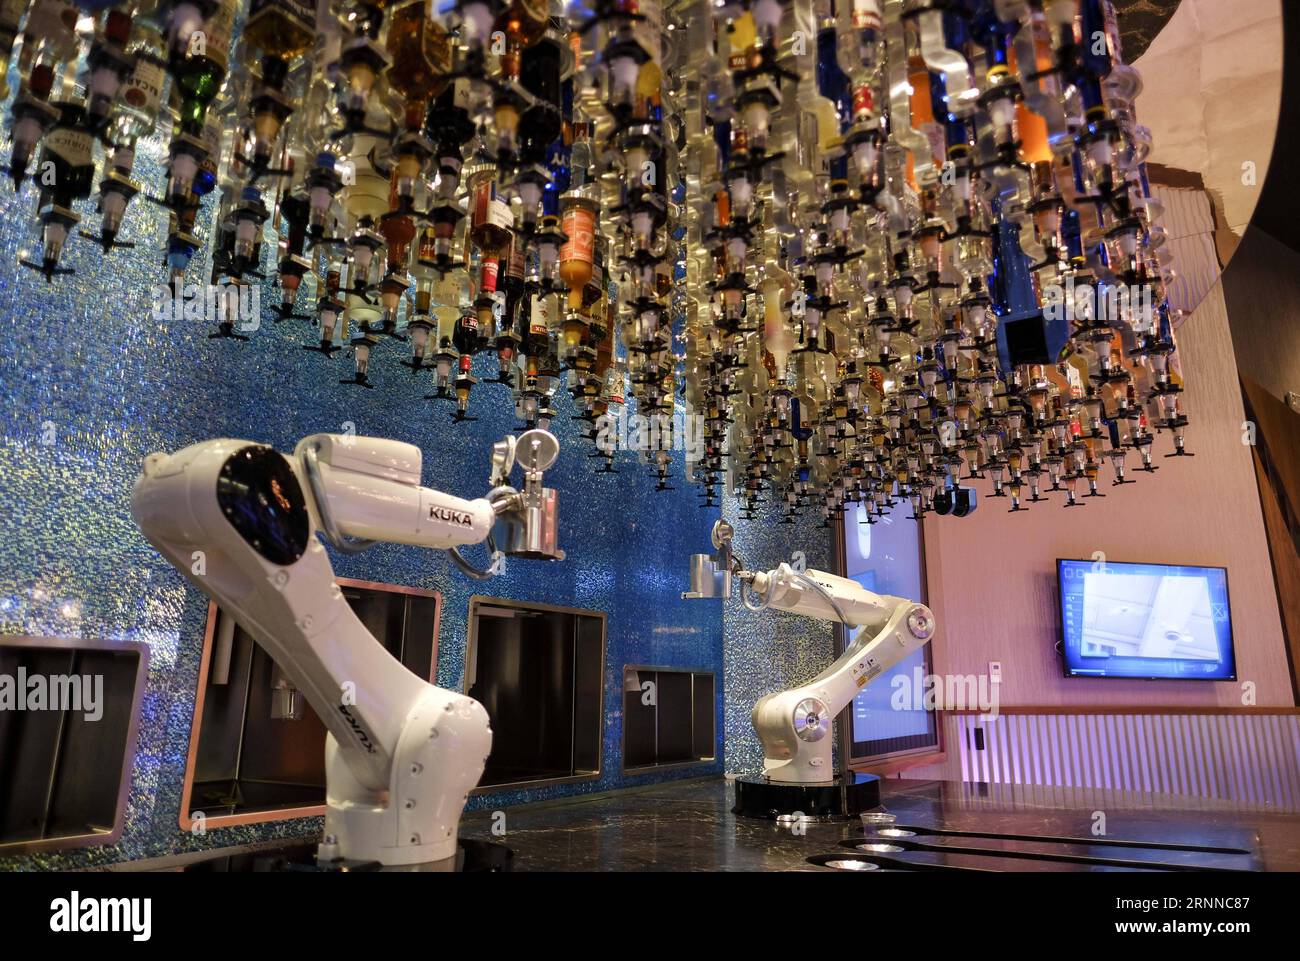 https://c8.alamy.com/comp/2RNNC87/170707-las-vegas-july-7-2017-robotic-bartenders-prepare-drinks-at-the-tipsy-robot-automated-bar-in-the-miracle-mile-shops-las-vegas-the-united-states-july-6-2017-zcc-us-las-vegas-robotic-bartenders-zhaoxhanrong-publicationxnotxinxchn-las-vegas-july-7-2017-robotic-bart-enders-prepare-drinks-at-the-tipsy-robot-automated-bar-in-the-miracle-mile-shops-las-vegas-the-united-states-july-6-2017-zcc-u-s-las-vegas-robotic-bart-enders-zhaoxhanrong-publicationxnotxinxchn-2RNNC87.jpg